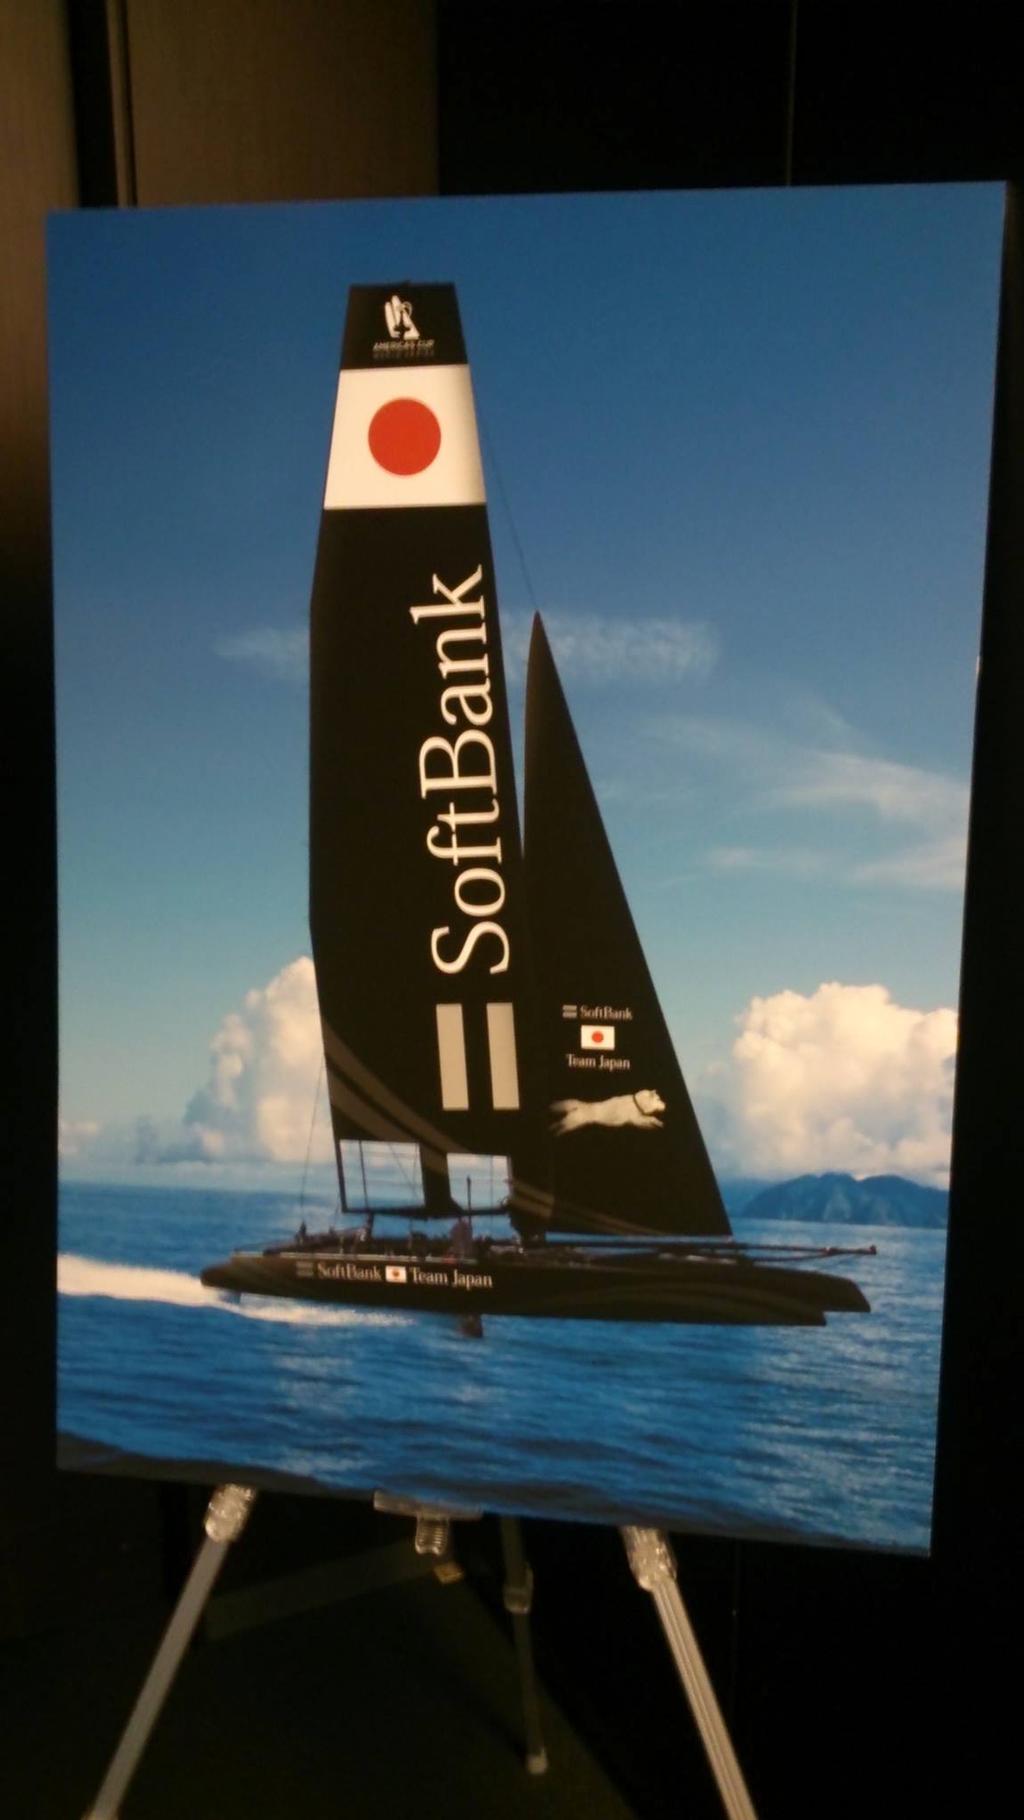 Graphic of the Americas Cup Challenge by Kansai Yacht Club (JPN) © SW